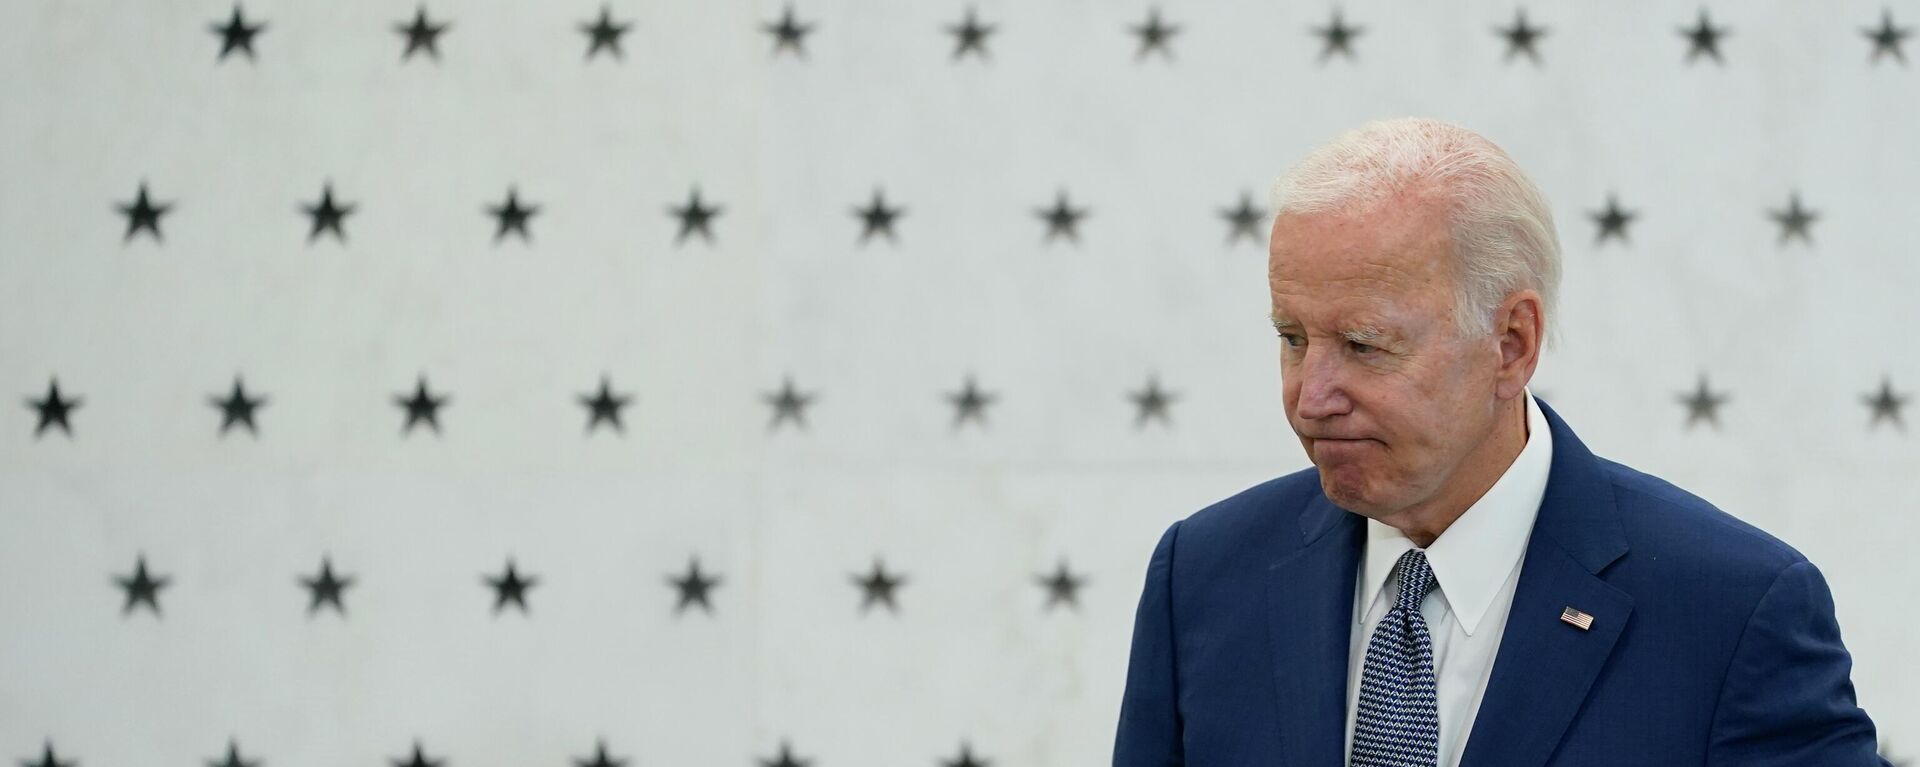 President Joe Biden finishes speaking at the Central Intelligence Agency headquarters in Langley, Va., Friday, July 8, 2022, where he thanked the workforce and commemorated the agency's achievements over the 75 years since its founding. - Sputnik International, 1920, 17.09.2022